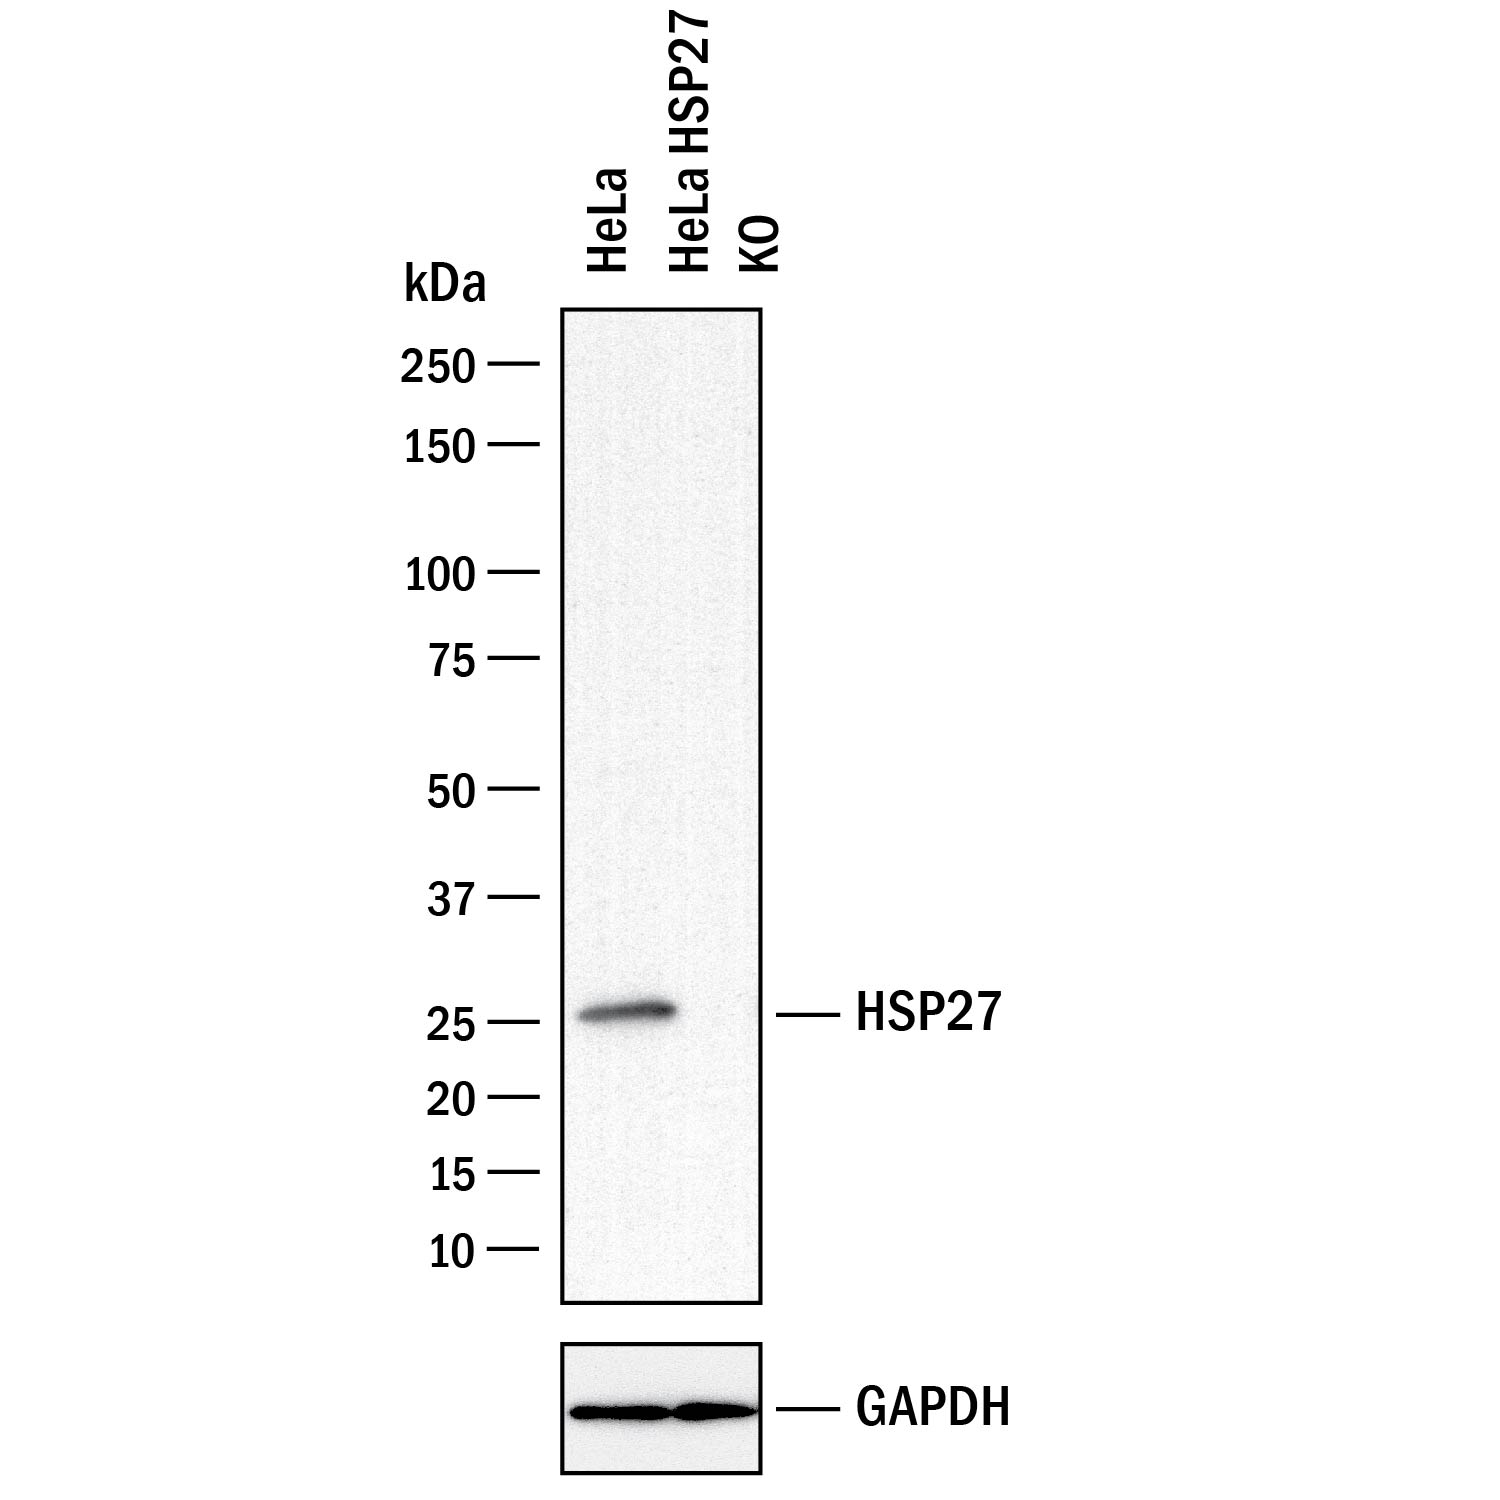 Western Blot Shows Human HSP27 Antibody Specificity by Using Knockout Cell Line.